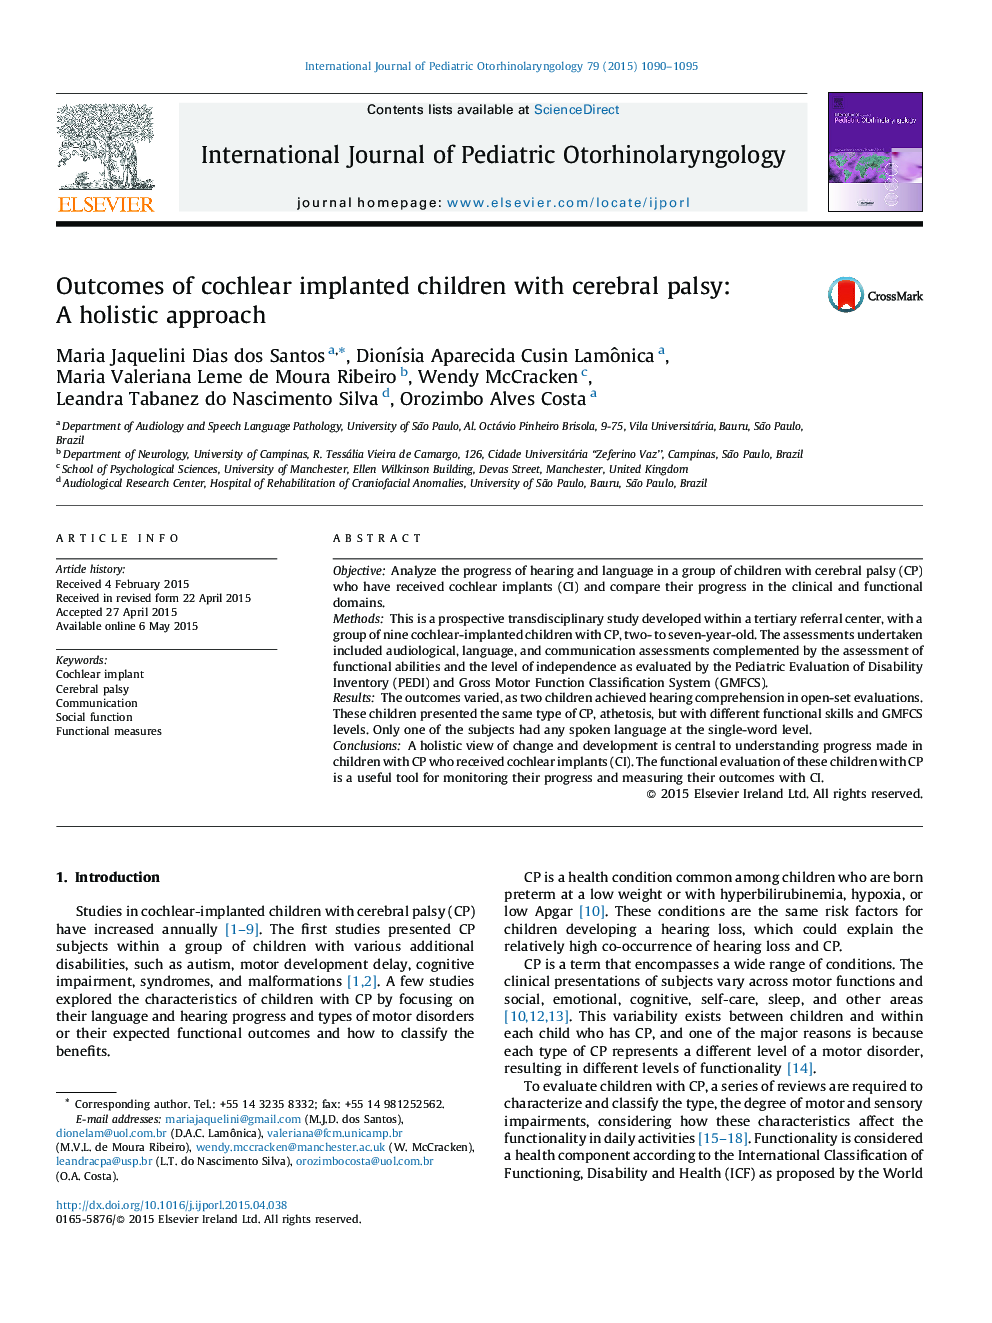 Outcomes of cochlear implanted children with cerebral palsy: A holistic approach